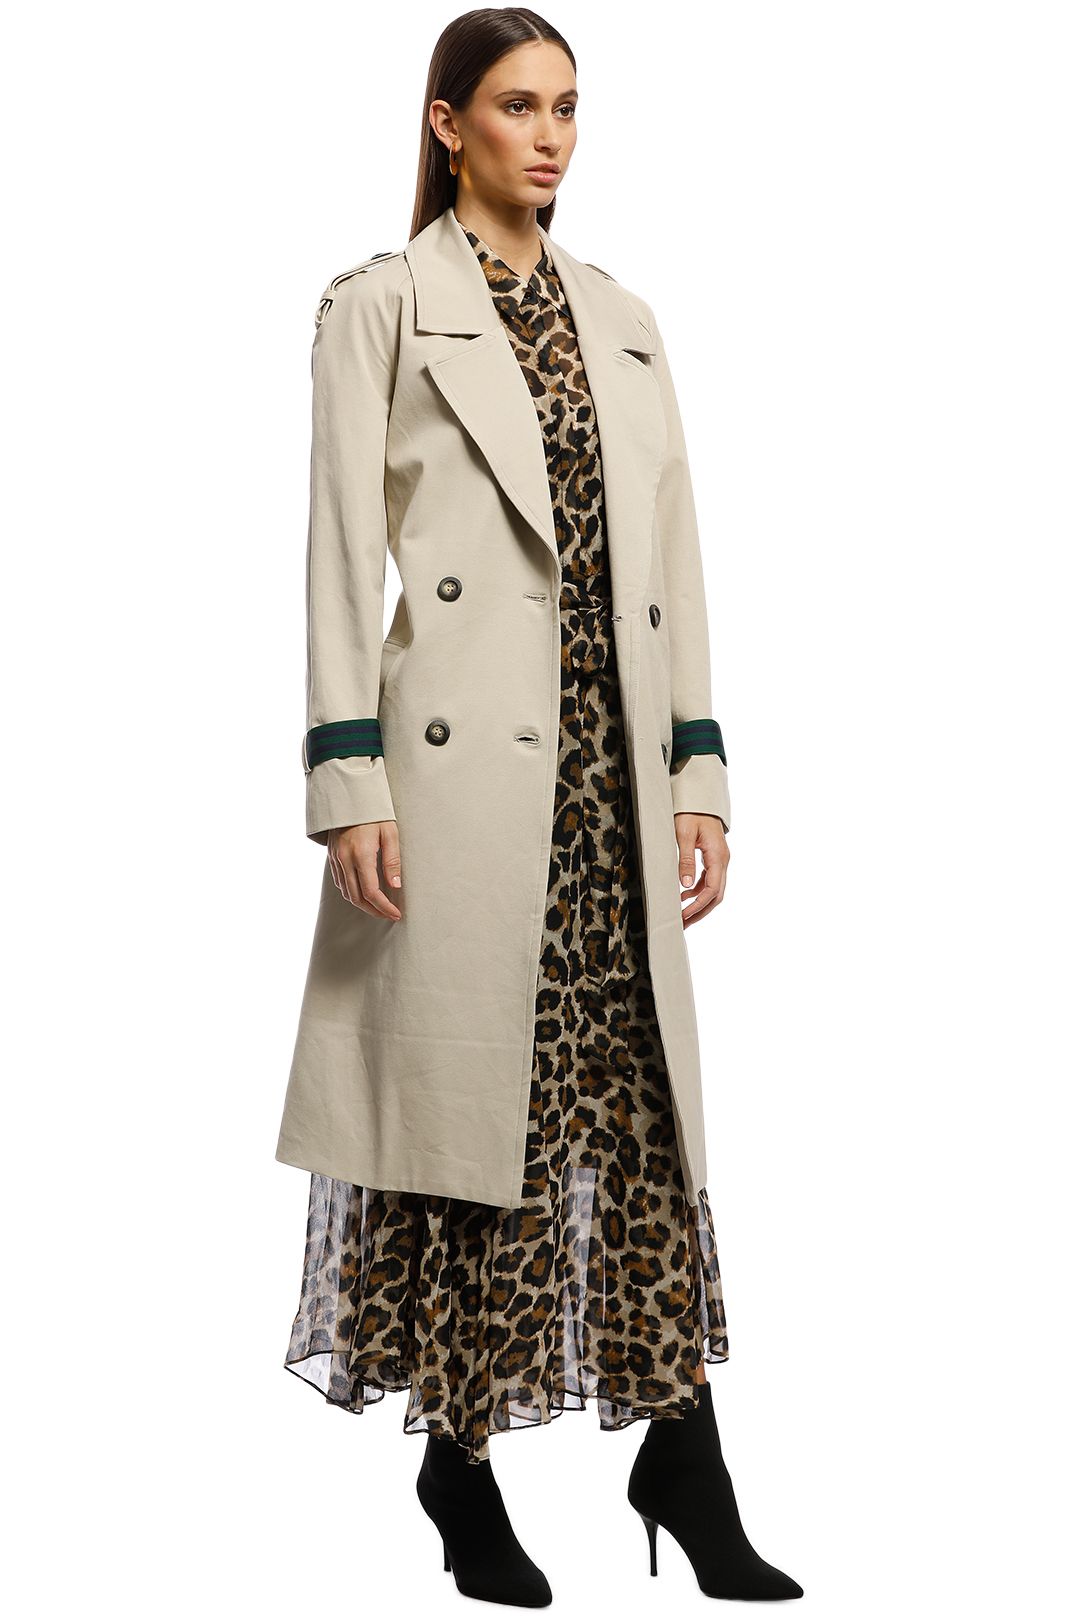 AKIN by Ginger & Smart - Breeze Trench - Taupe - Side